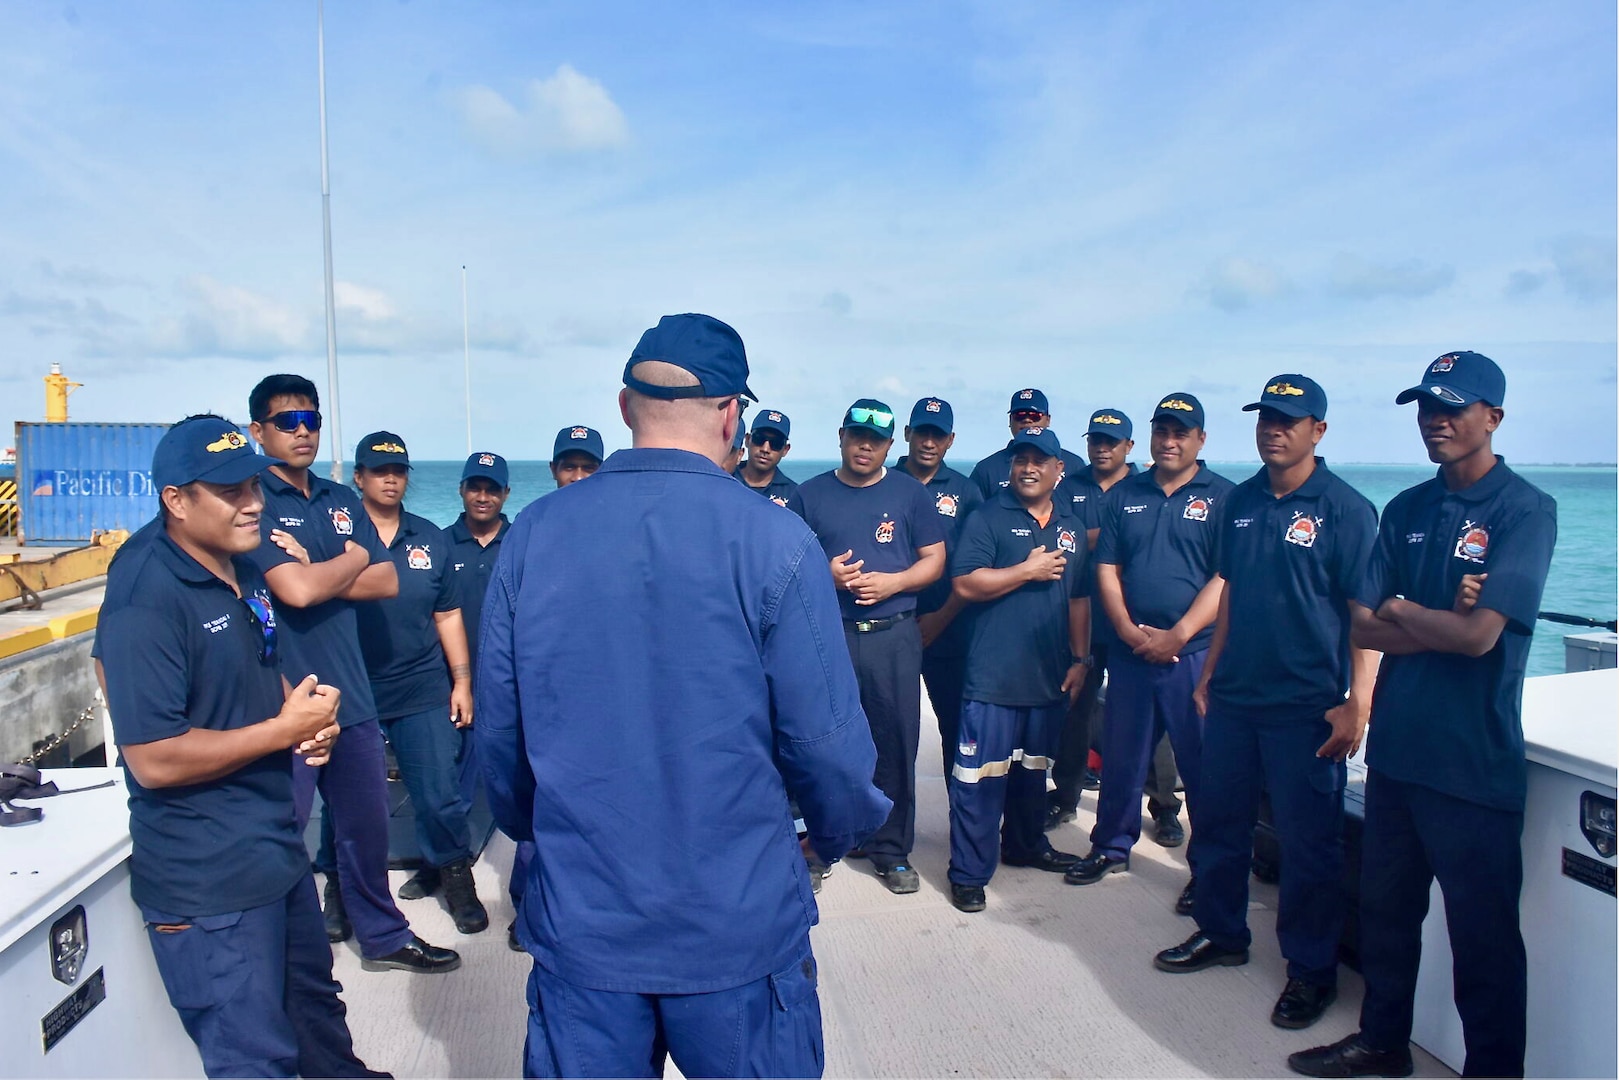 Lt. Stephen Mueller of the International Maritime Training Team addresses Kiribati Police Maritime Unit officers and recruits aboard the USCGC Oliver Henry (WPC 1140) in Tarawa, Kiribati, on Feb. 16, 2024. For the first time since 2015, the patrol incorporated shipriders from the PMU, executing the maritime bilateral agreement signed with Kiribati in 2008. These engagements under Operation Blue Pacific emphasize the United States' commitment to strengthening ties and ensuring maritime security within the Pacific community. (U.S Coast Guard photo by Lt. j.g. Nicholas Haas)